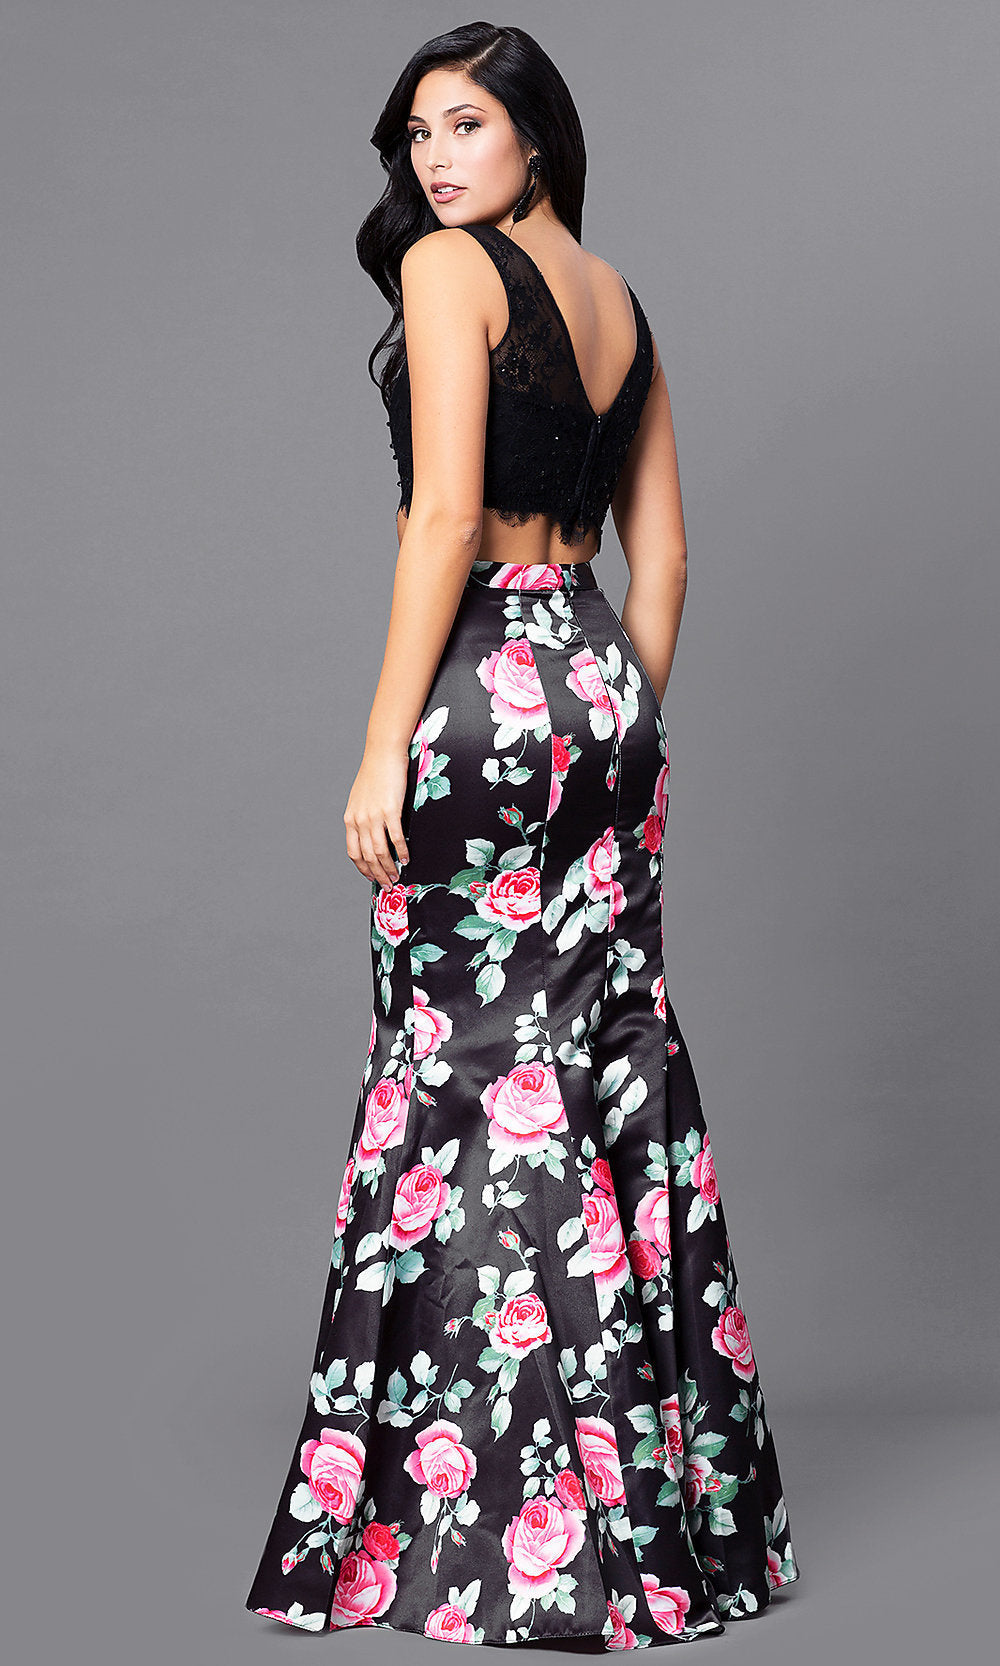  Floral-Print Skirt and Lace-Top Black Prom Dress